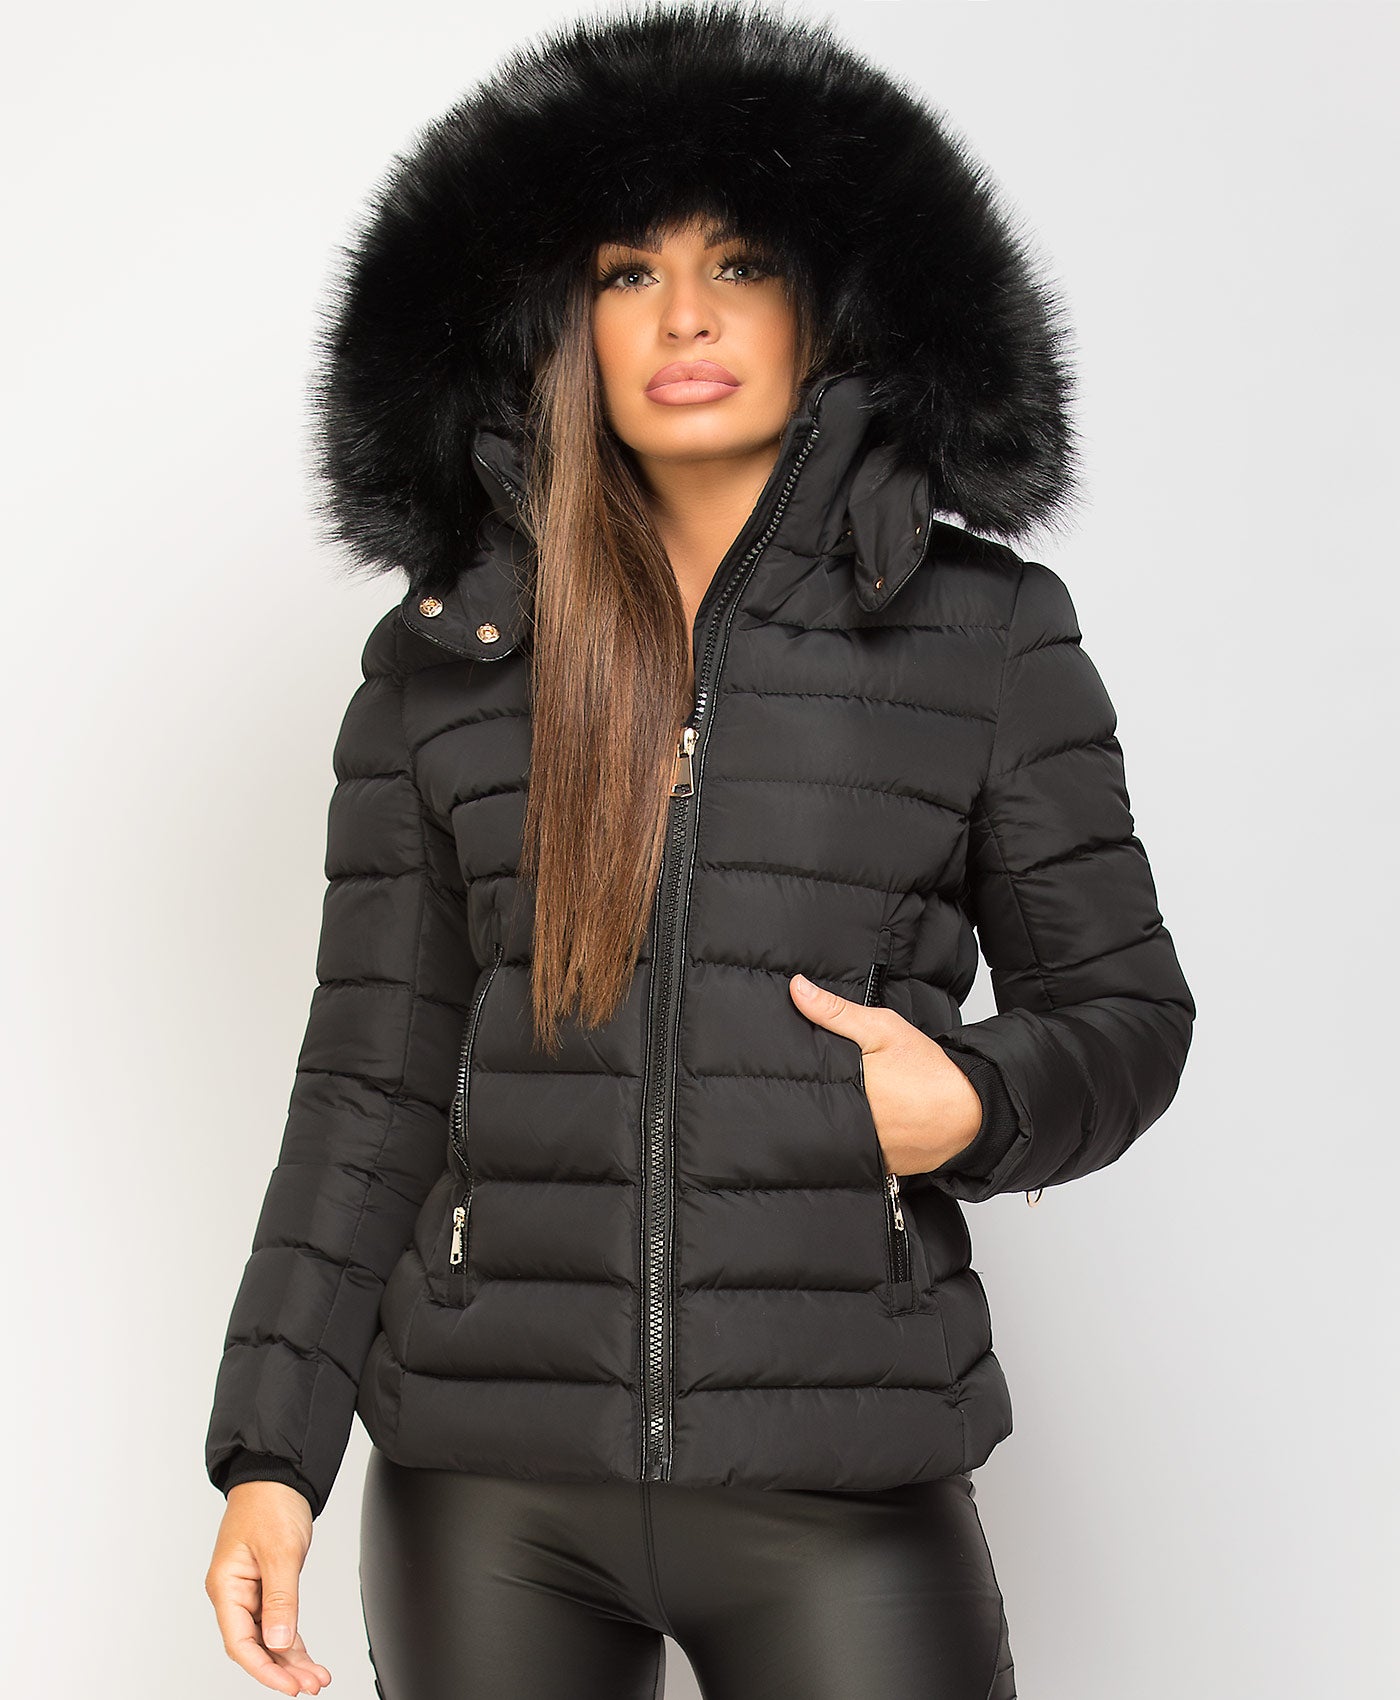 Black-Y-912-Quilted-Padded-Contrast-Fur-Hooded-Puffer-Jacket-1